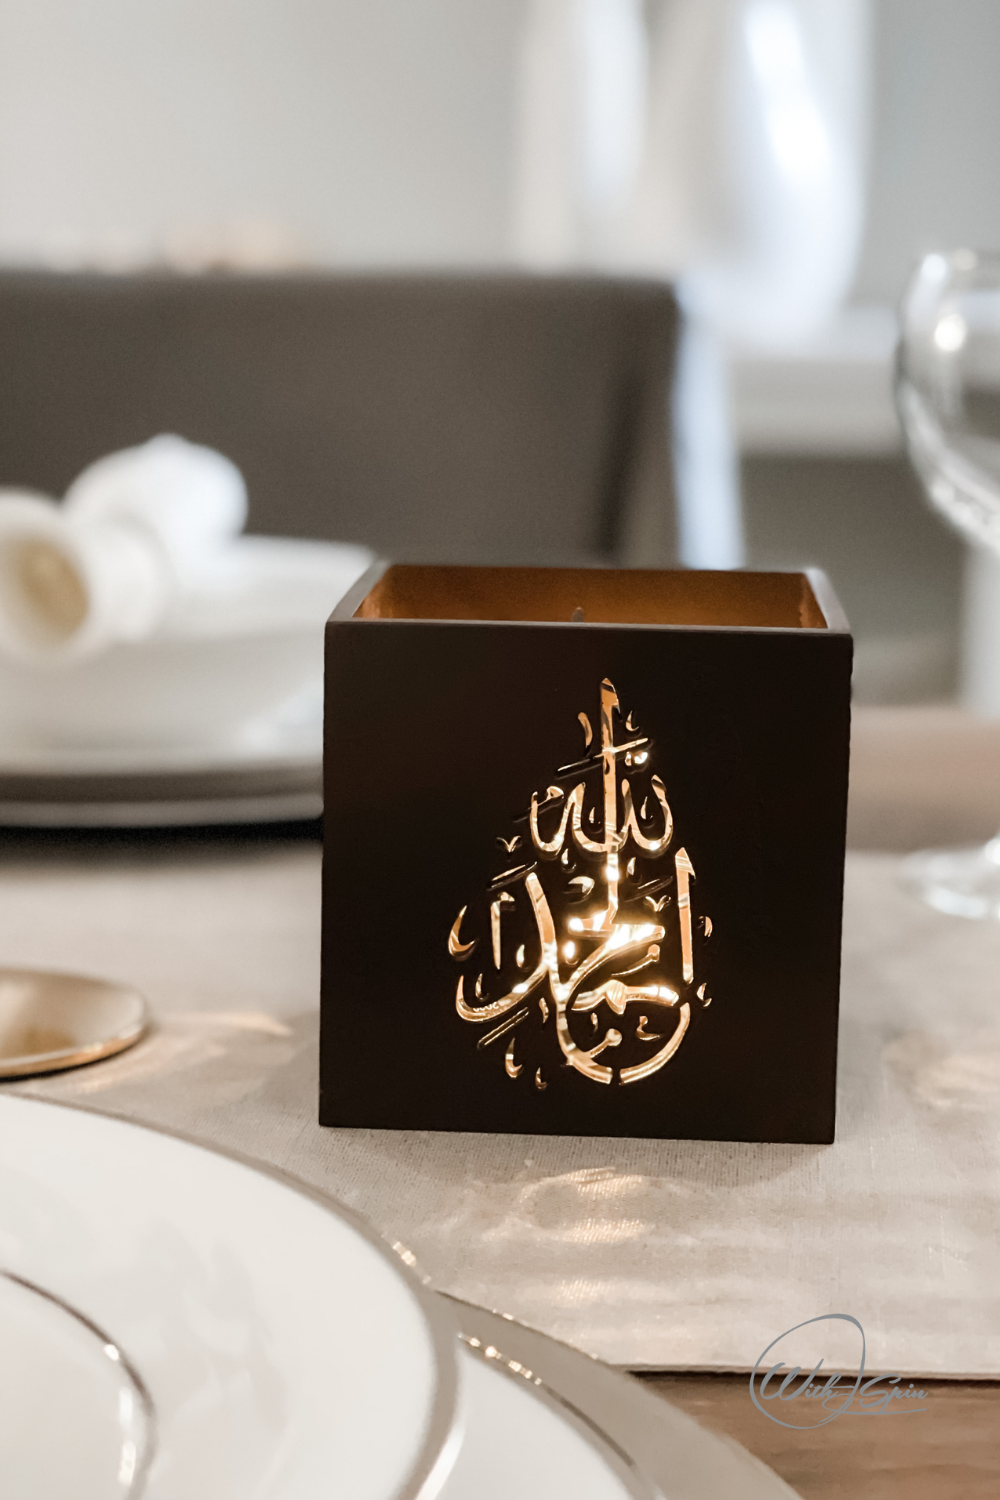 Islamic centerpiece for dining table - WithASpin